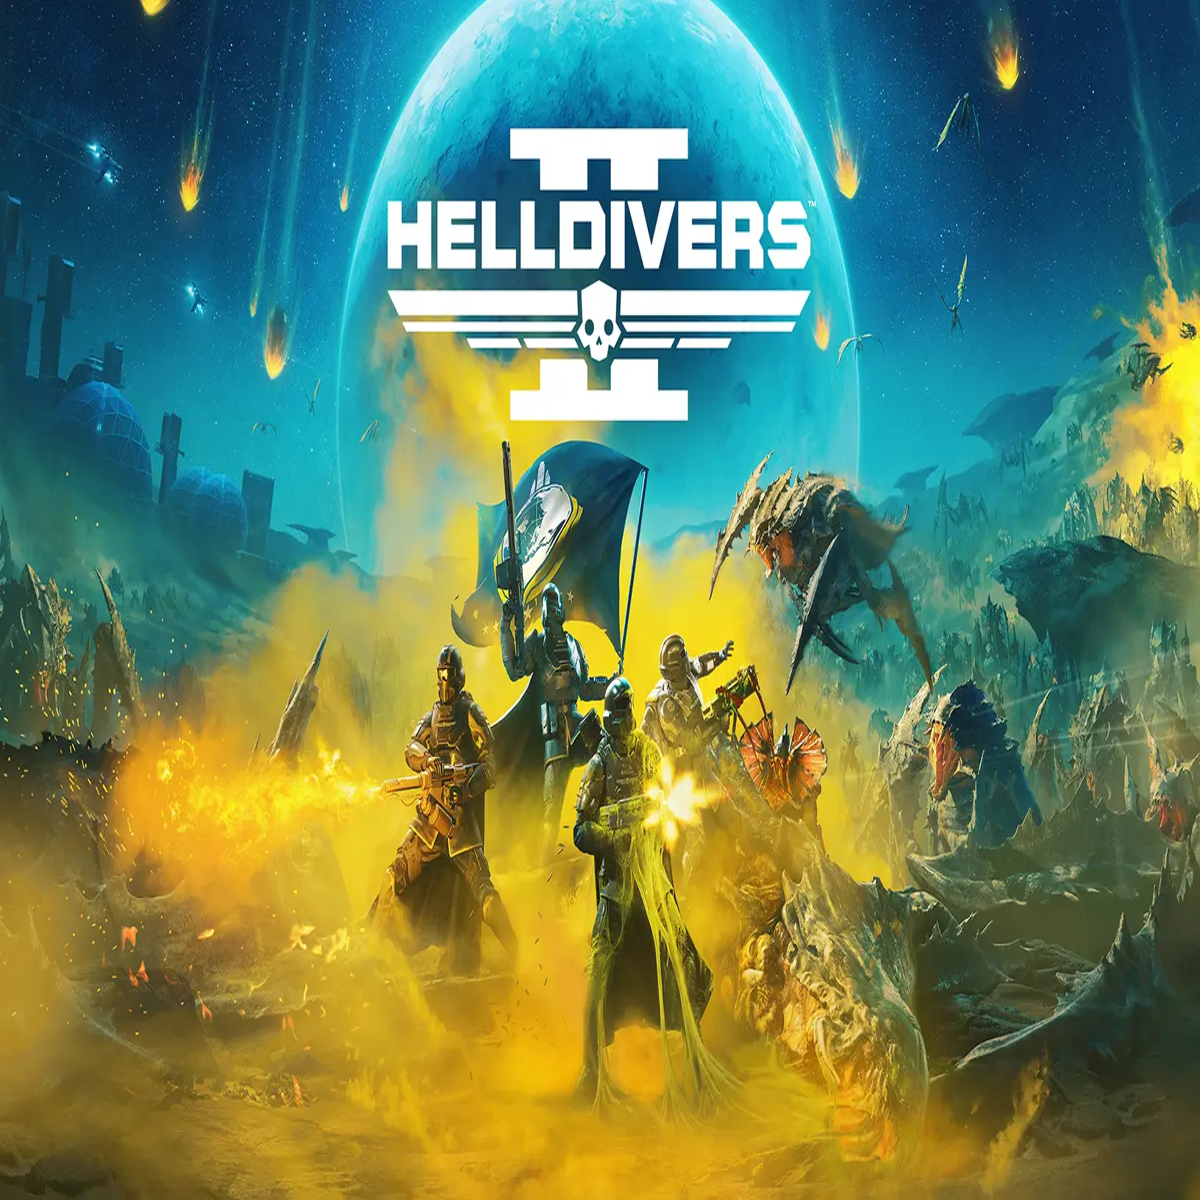 Helldivers 2 drops on PS5 February 8.